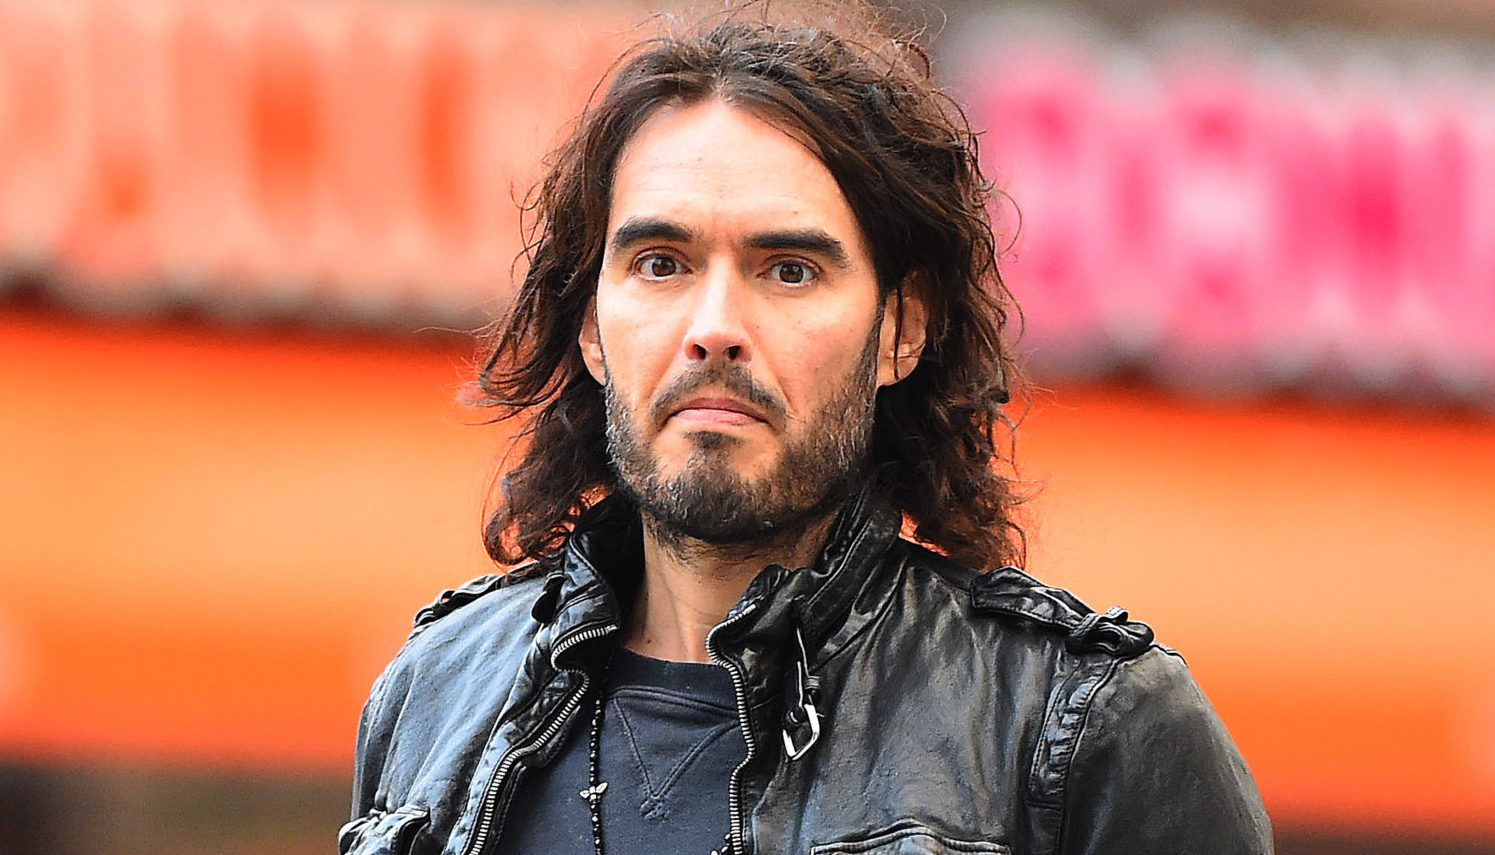 Russell Brand Slammed For Analysis Of Cardi B's WAP Music Video |  SPINSouthWest